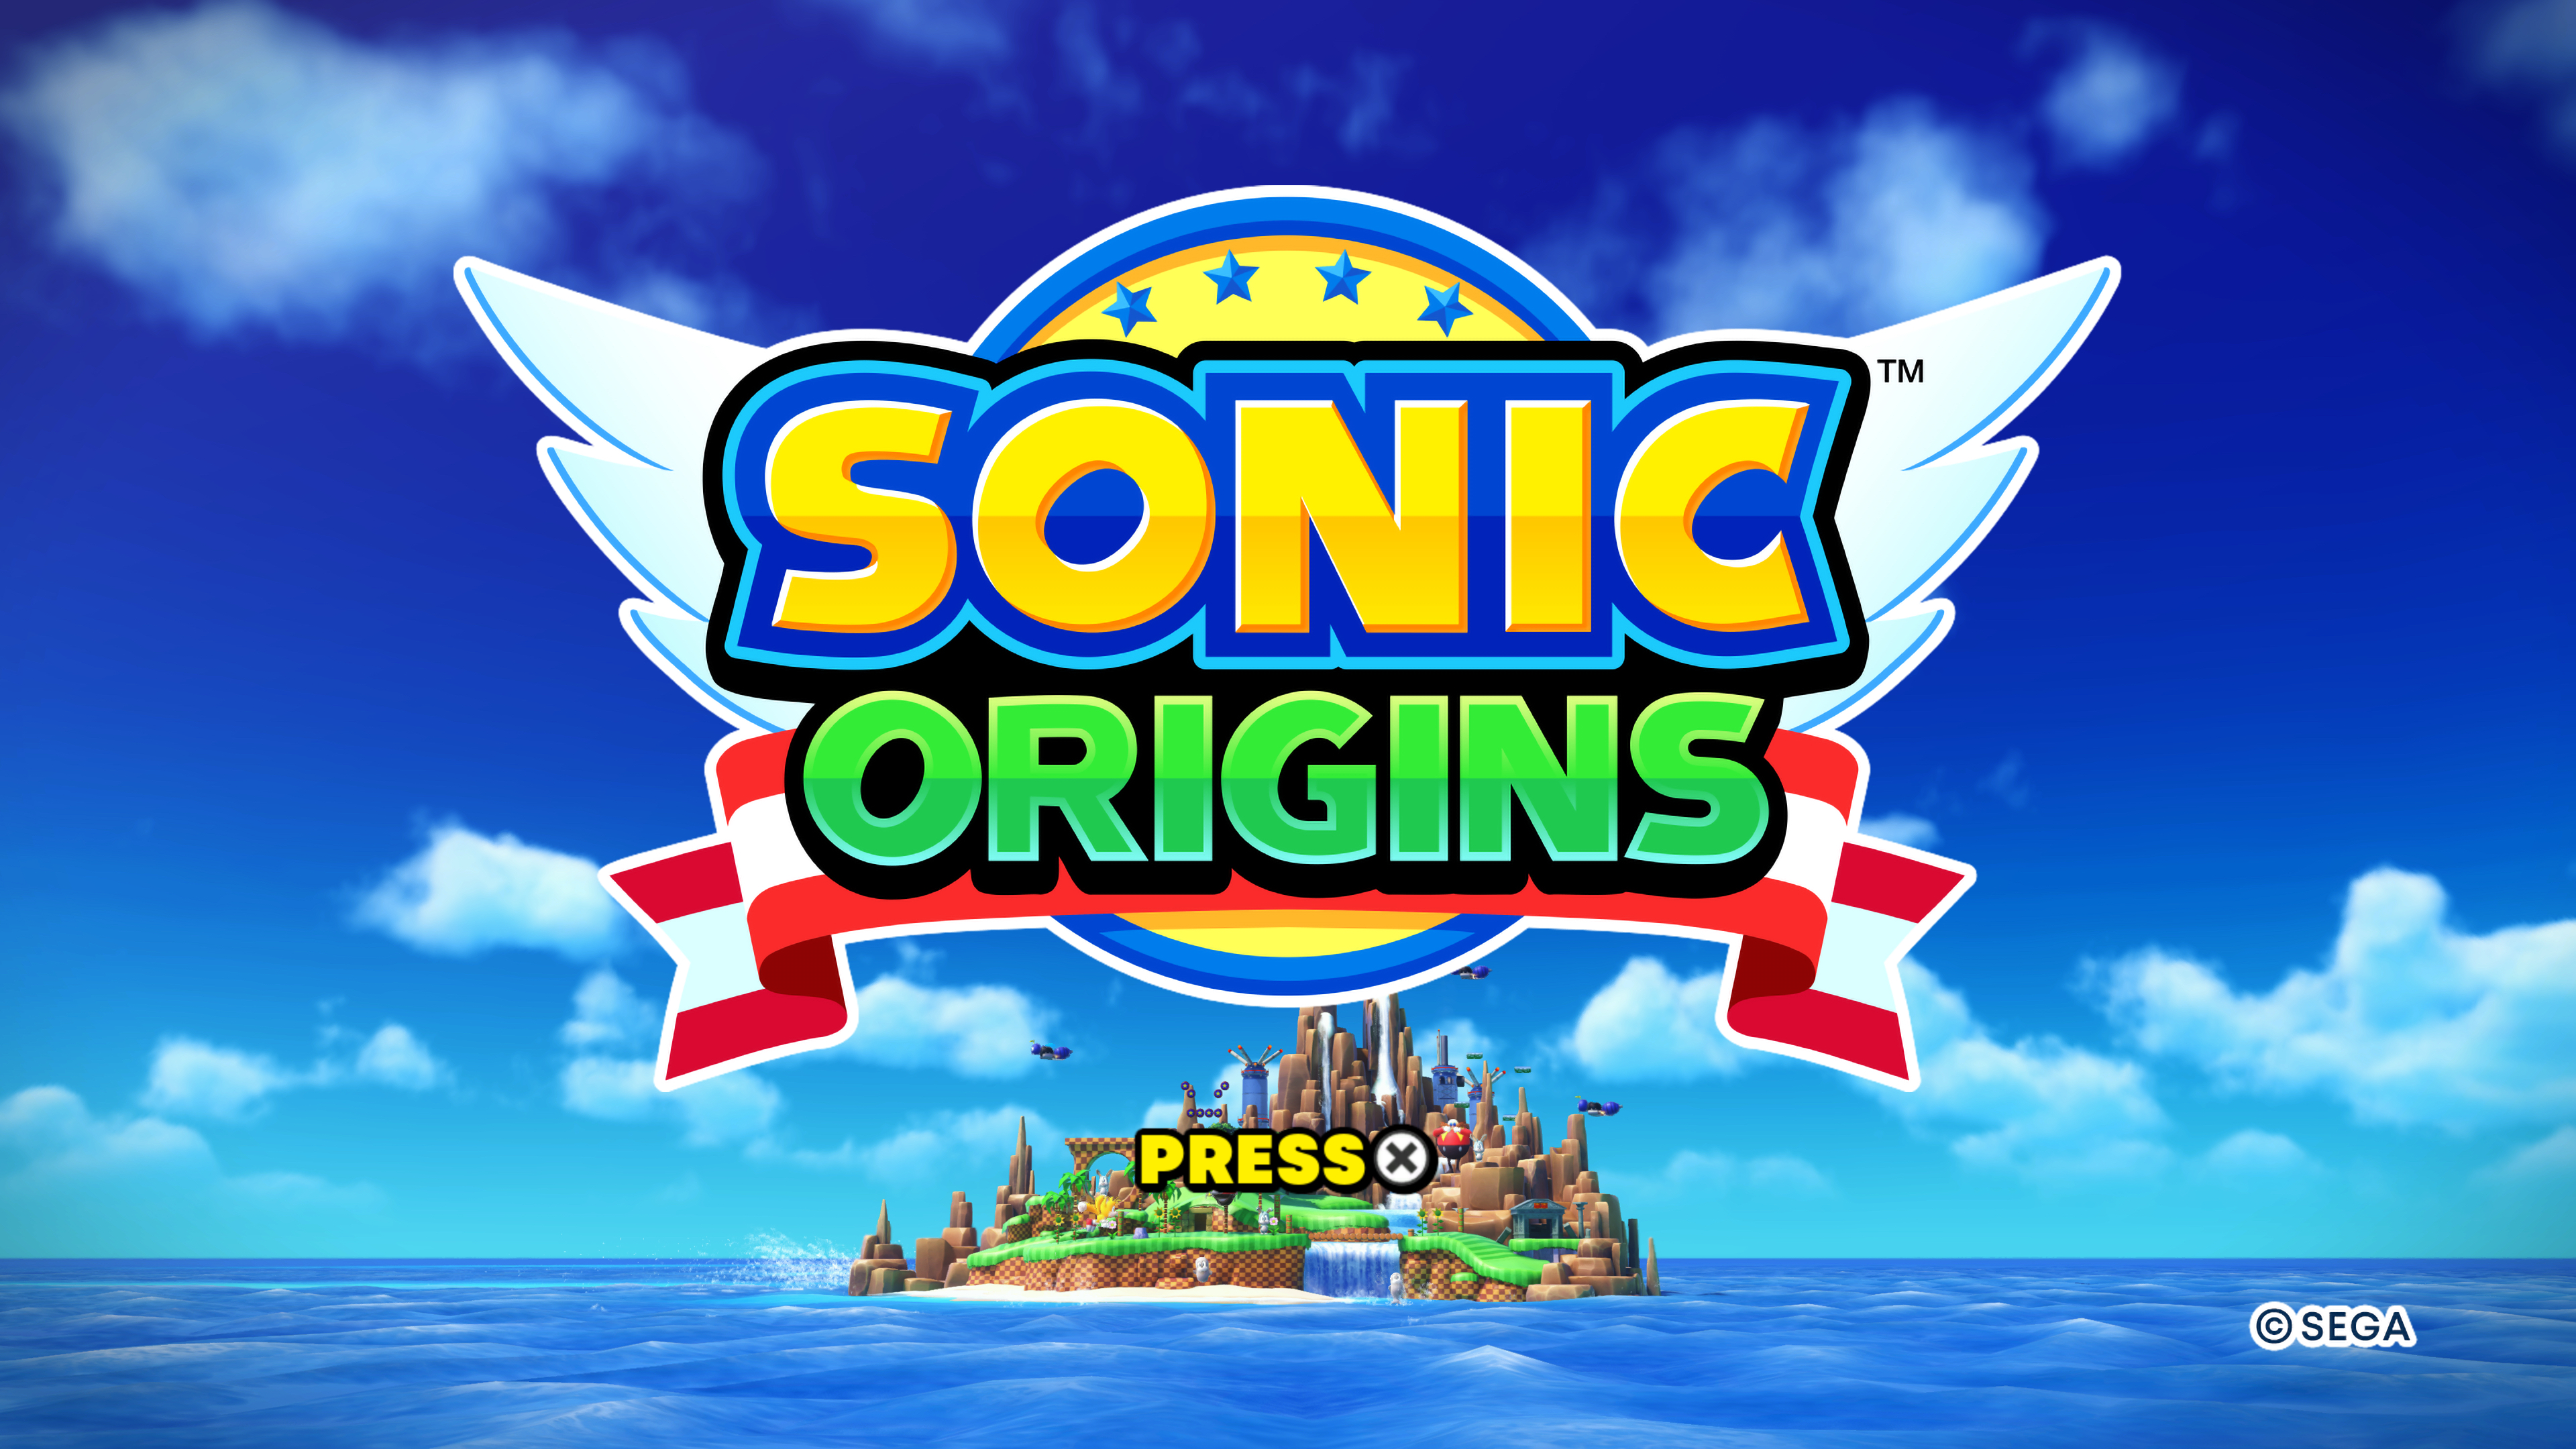 Sonic Origins' retro game collection rated in Korea